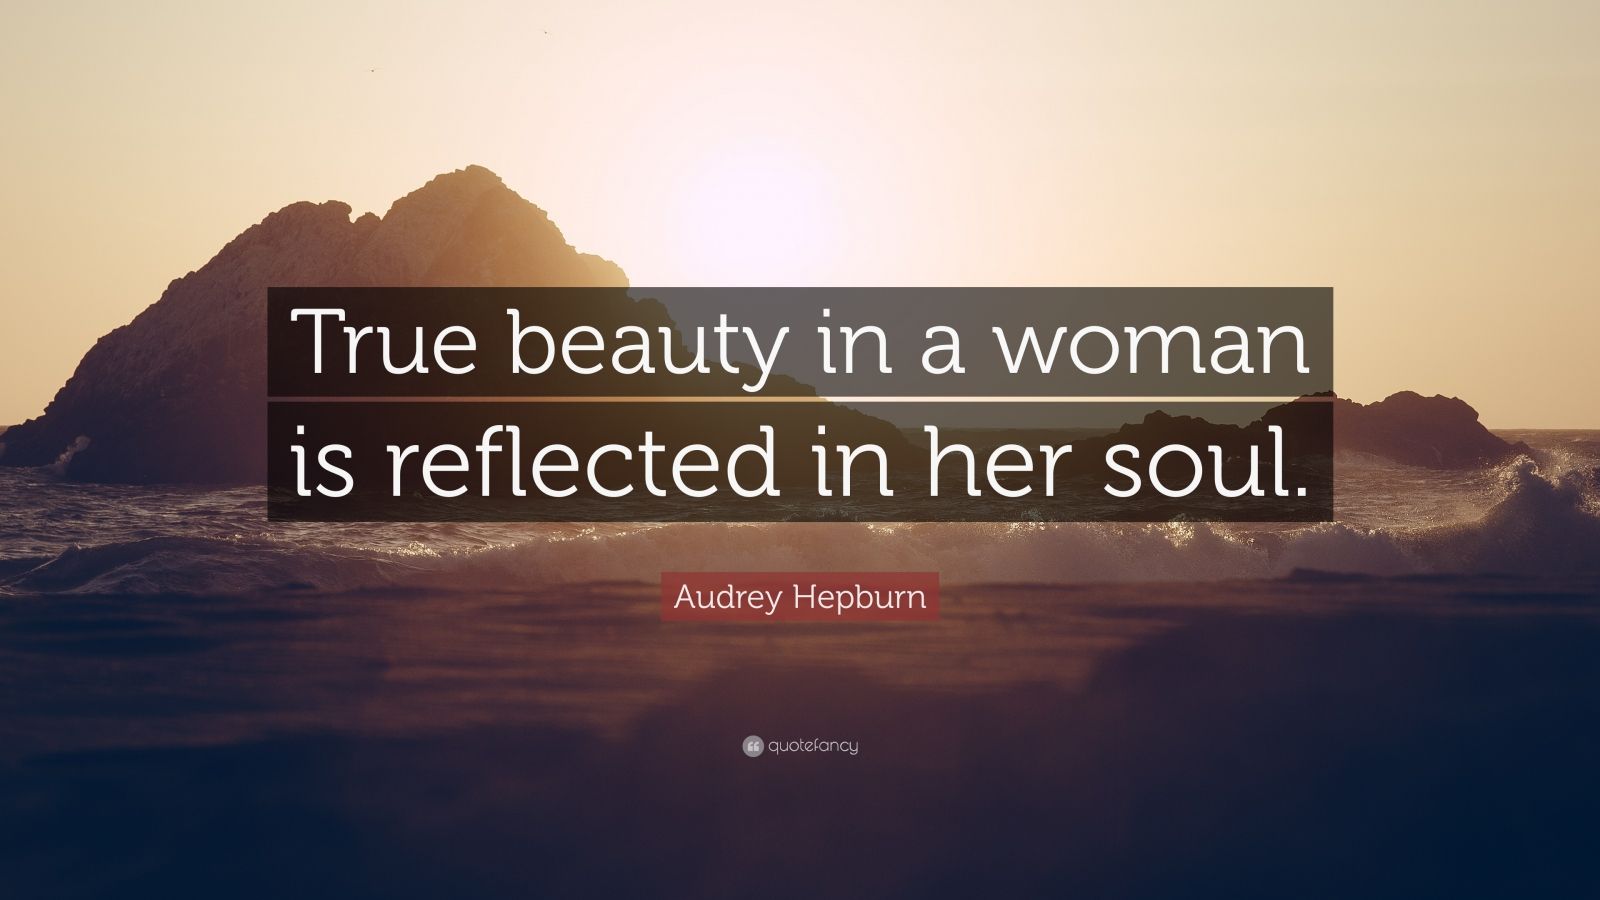 Audrey Hepburn Quote: “True beauty in a woman is reflected in her soul ...